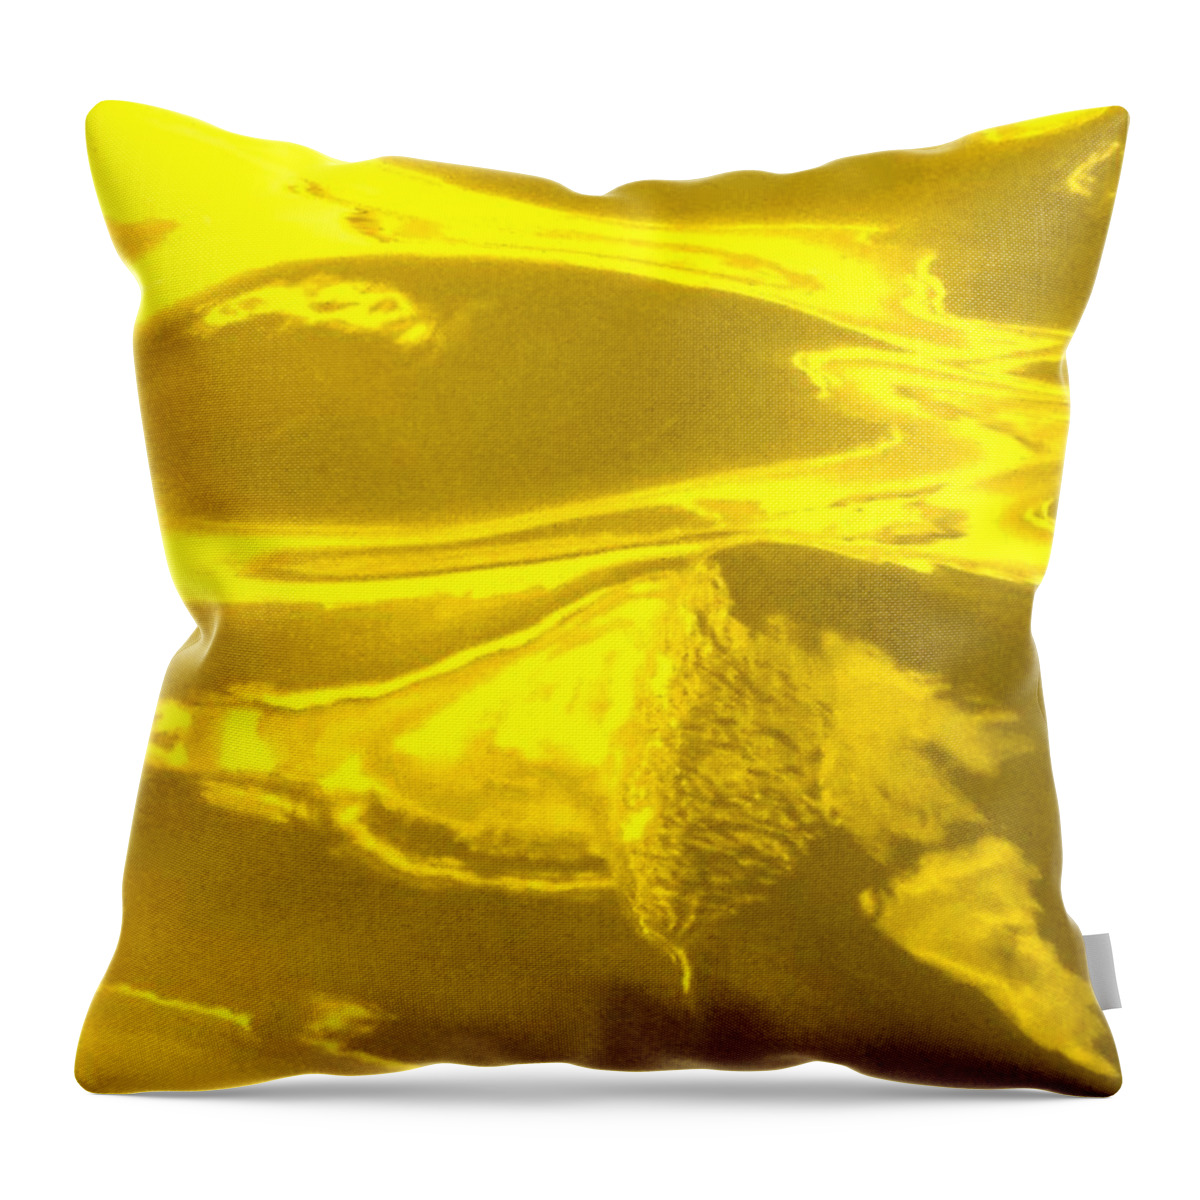 Multi Panel Throw Pillow featuring the photograph Colored Wave Yellow Panel Four by Stephen Jorgensen